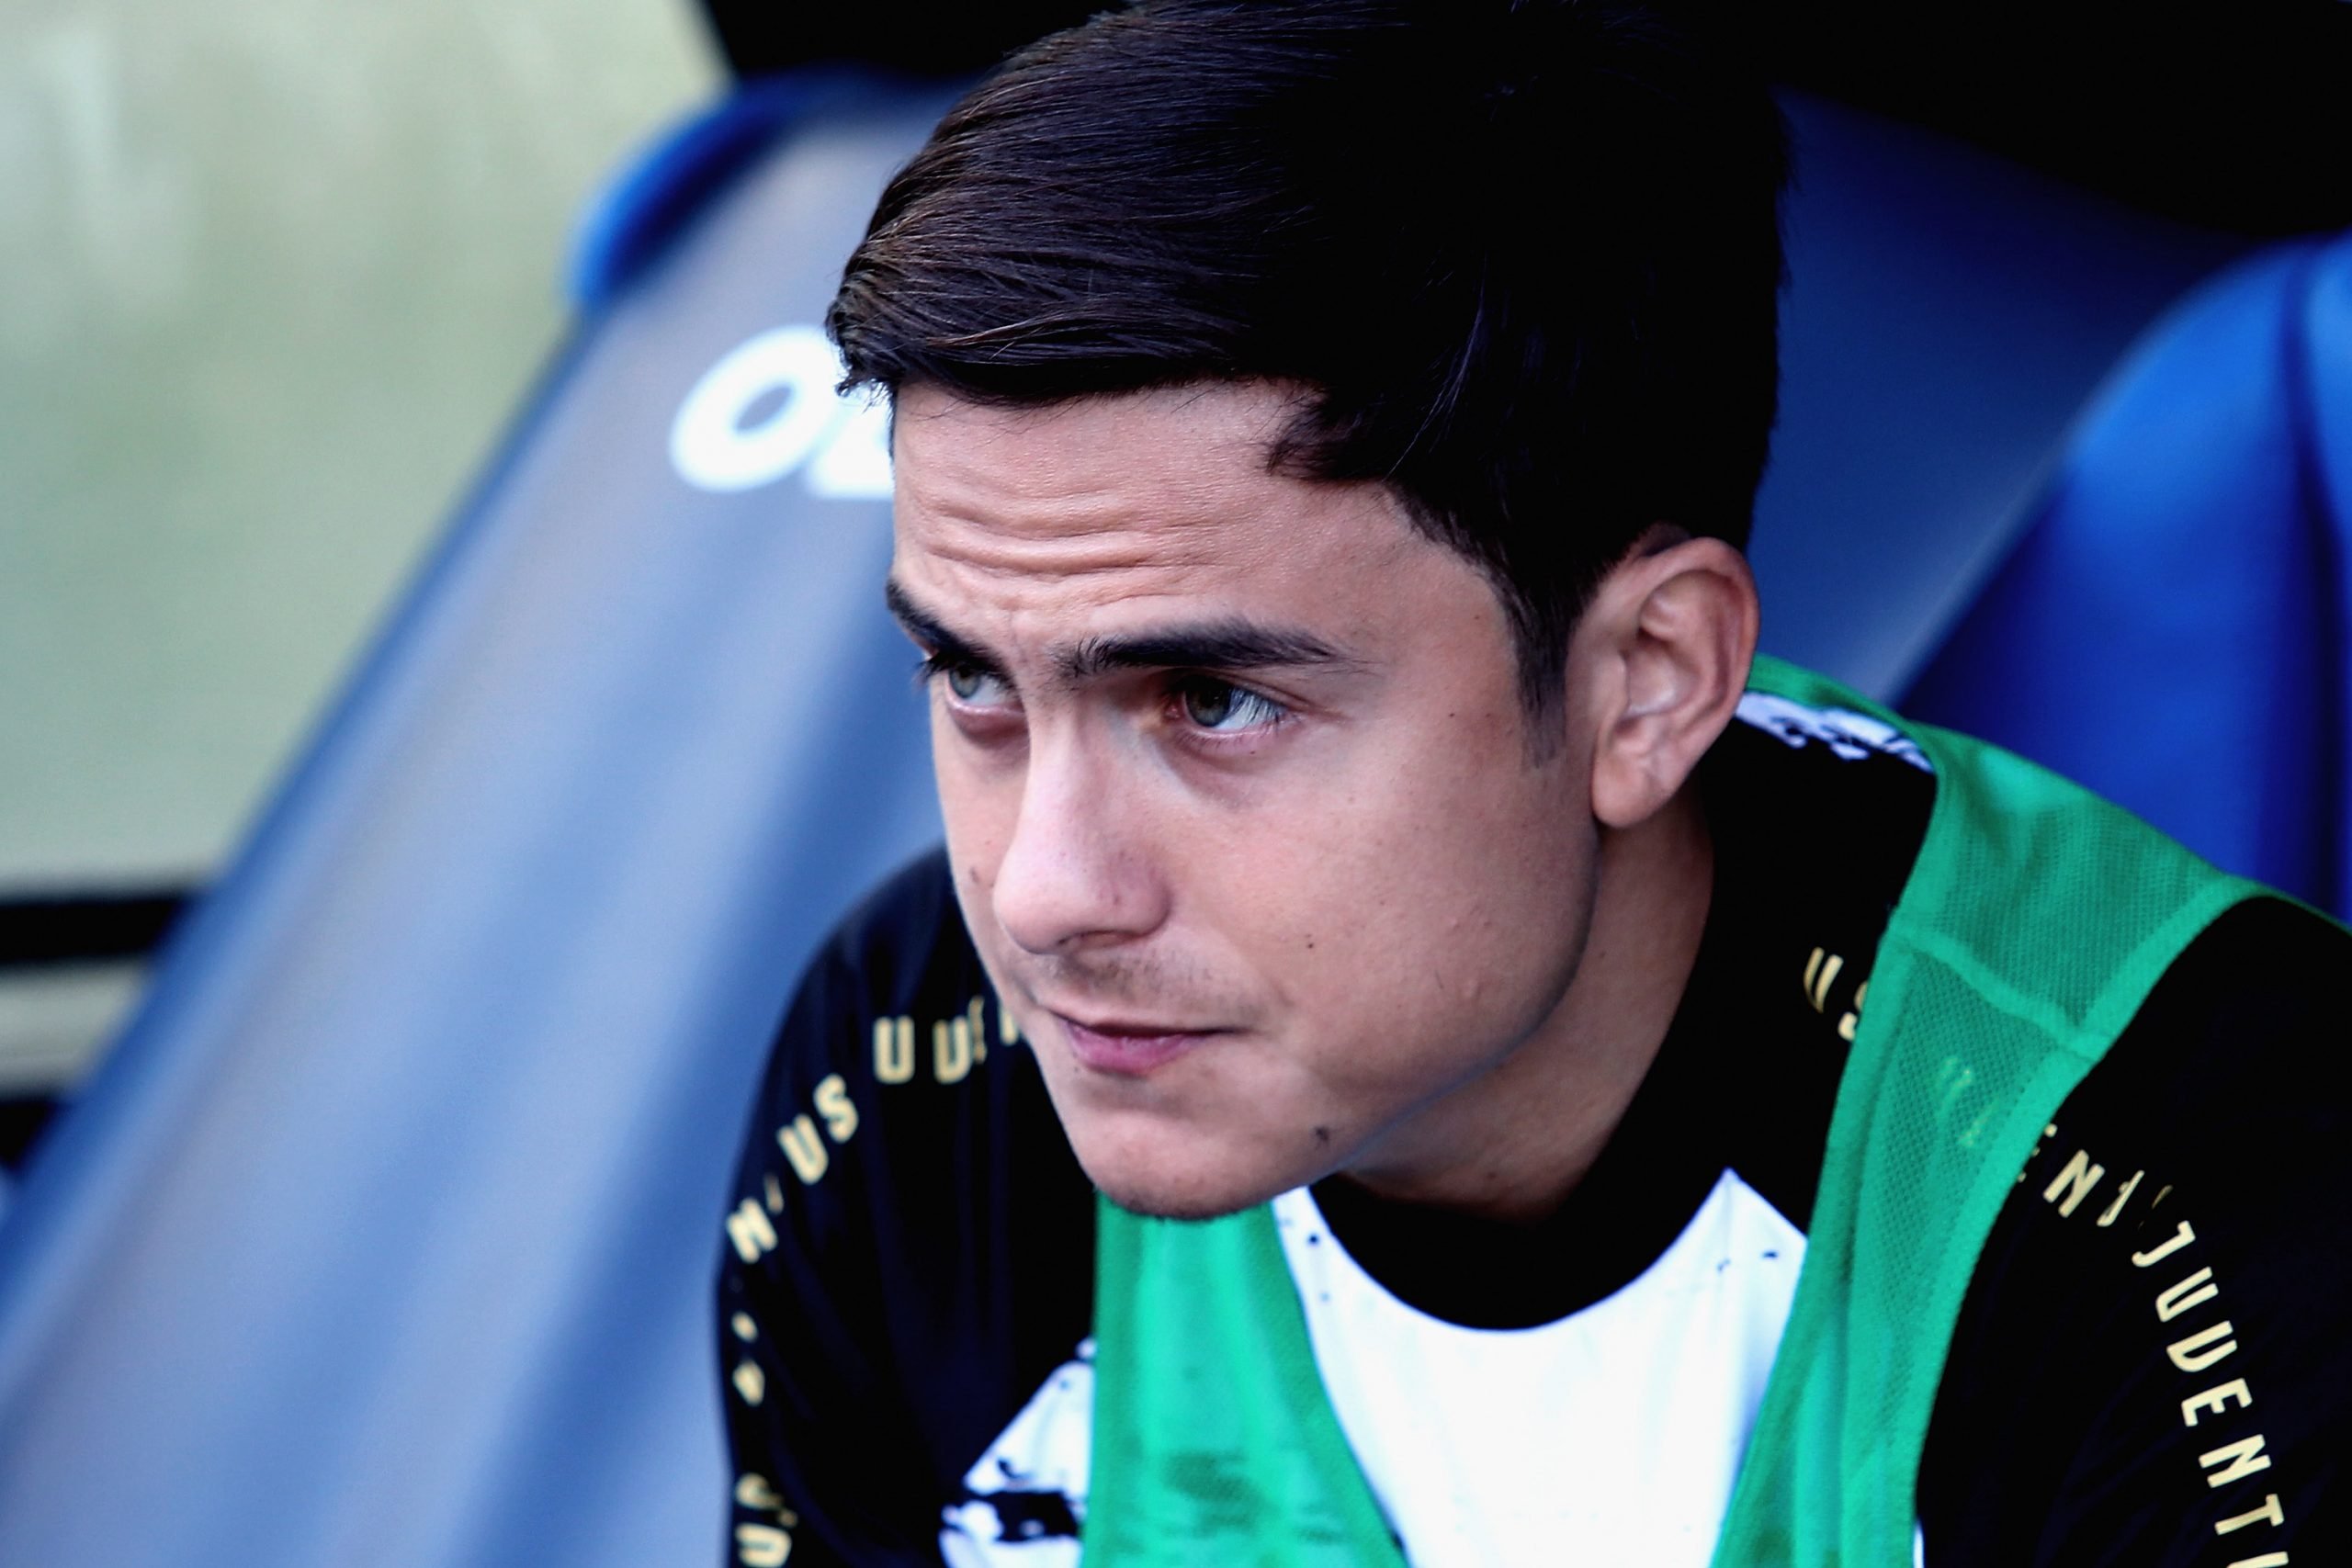 Journalist provides update on Chelsea's pursuit of Dybala who is seen in the photo